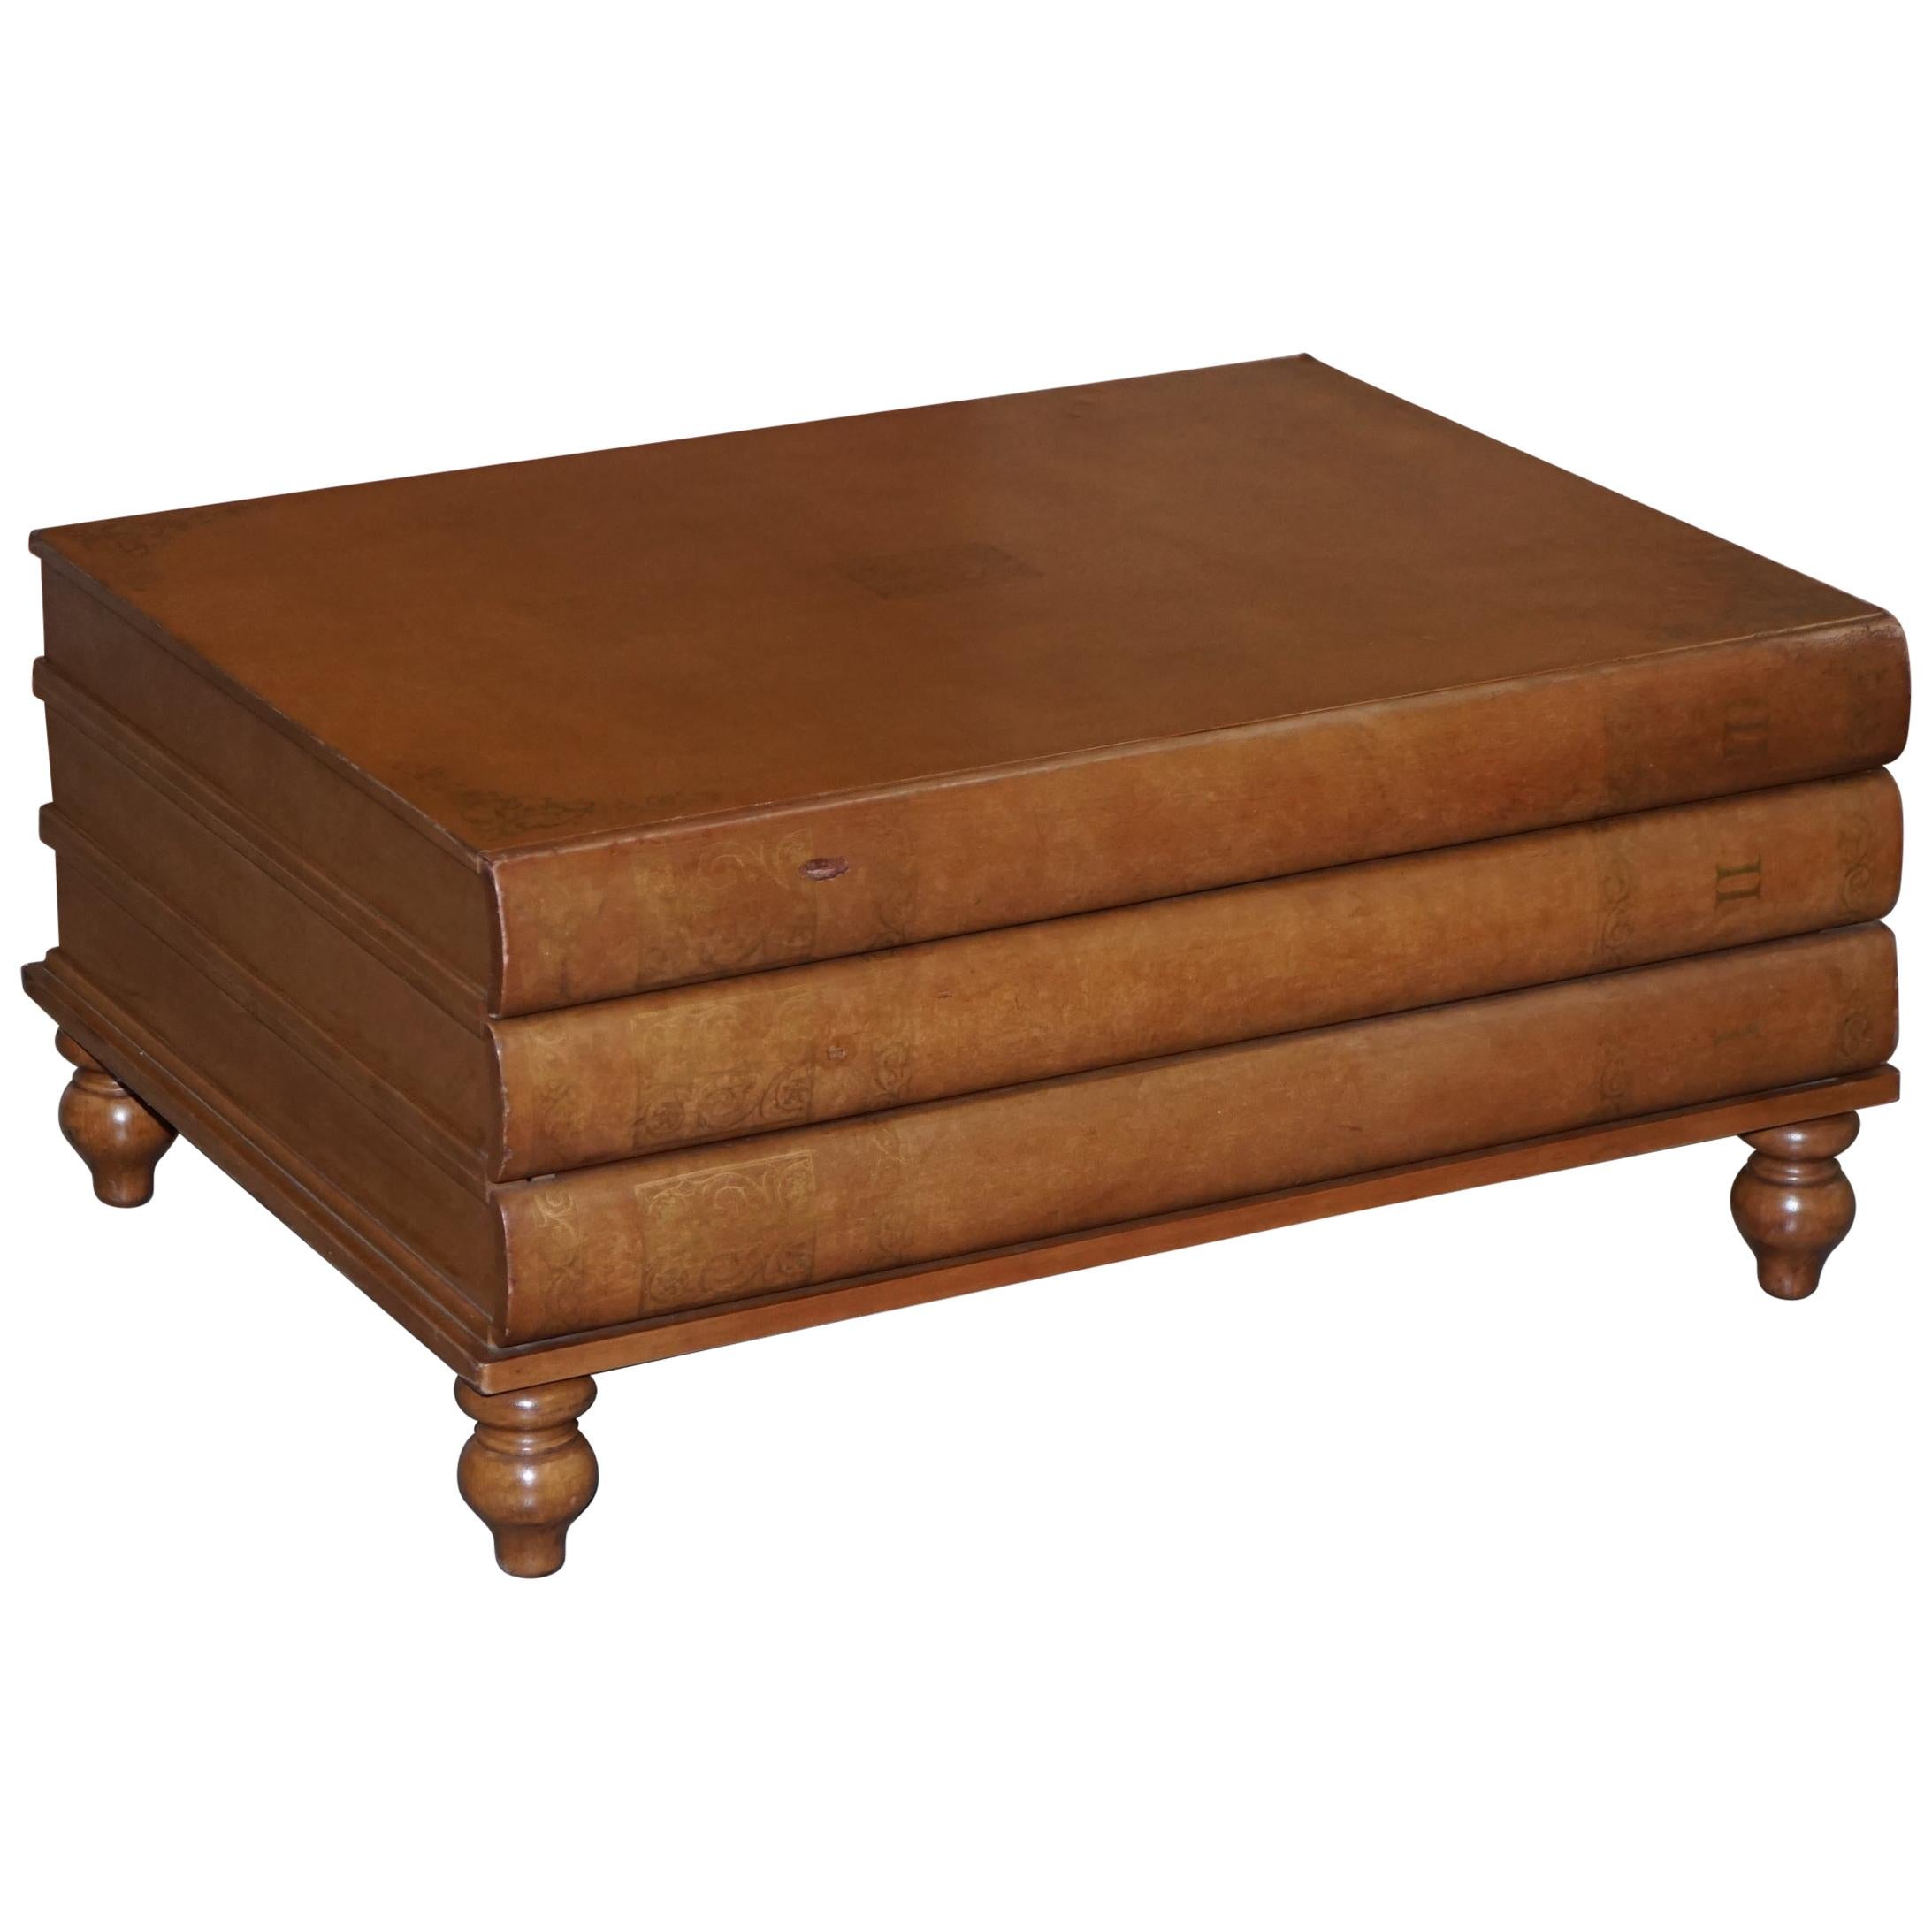 Maintland Smith Stack of Scholars Library Books Coffee Table with Drawers For Sale